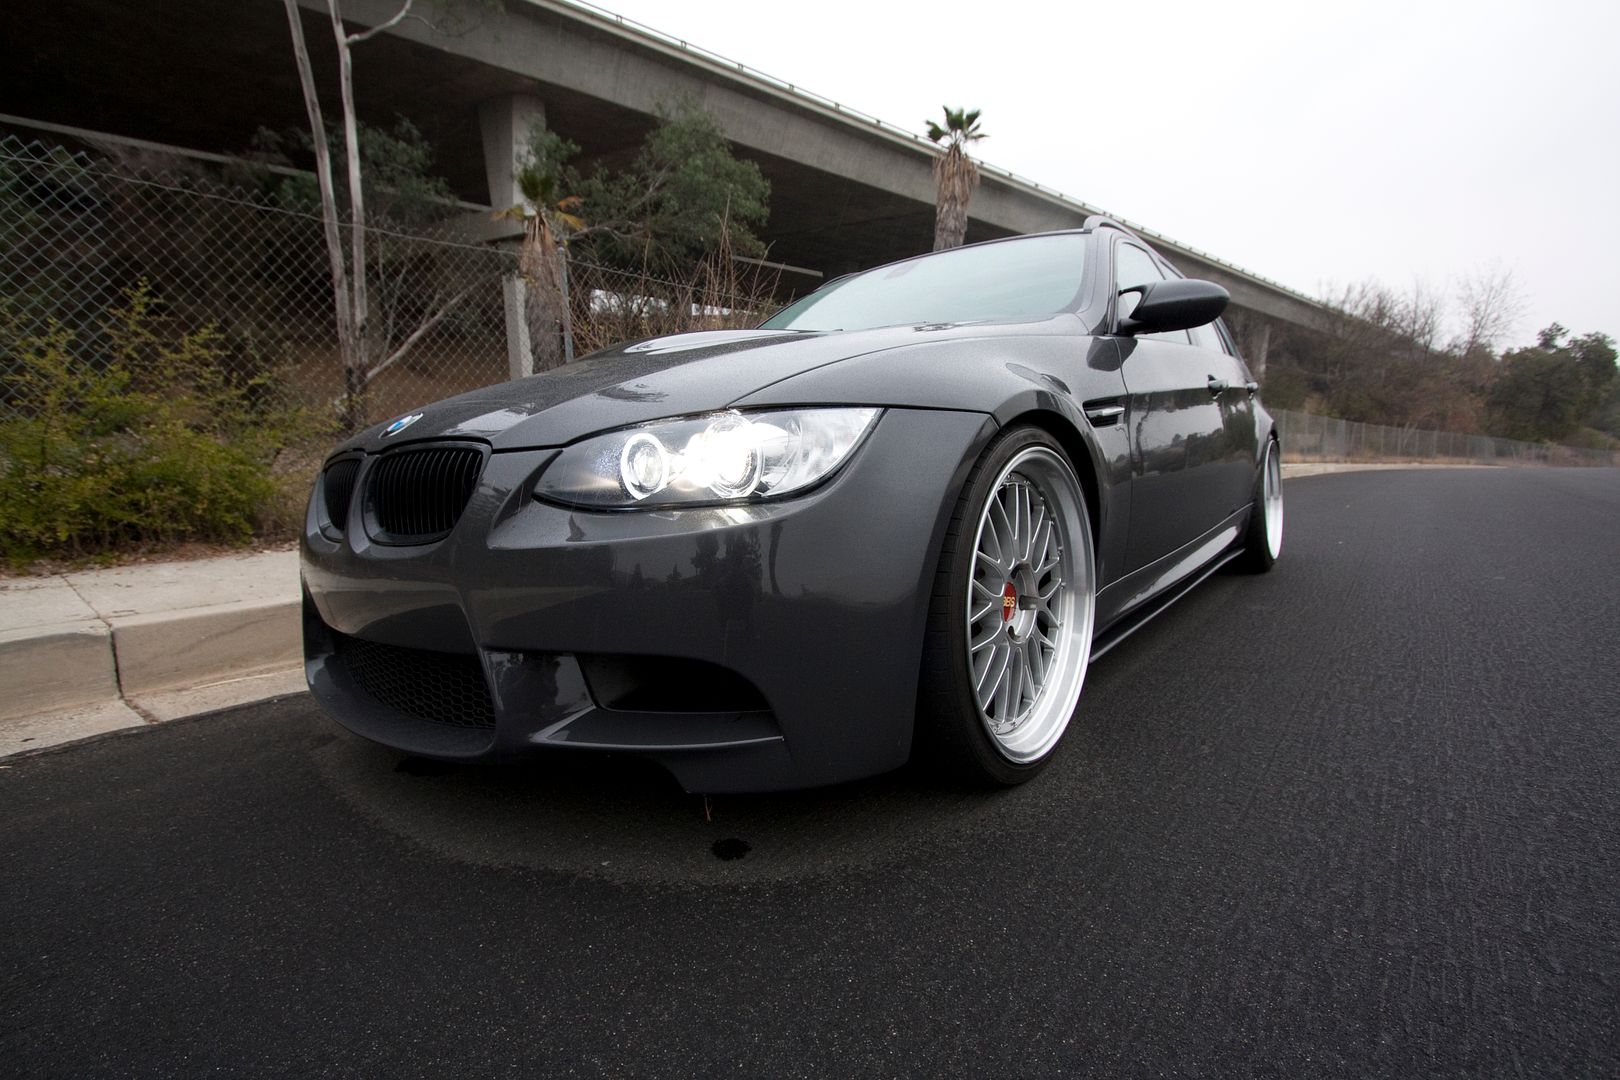 BMW For Sale 2009 BMW E91 M3 Body Conversion 1st in US - BMW M5 Forum ...